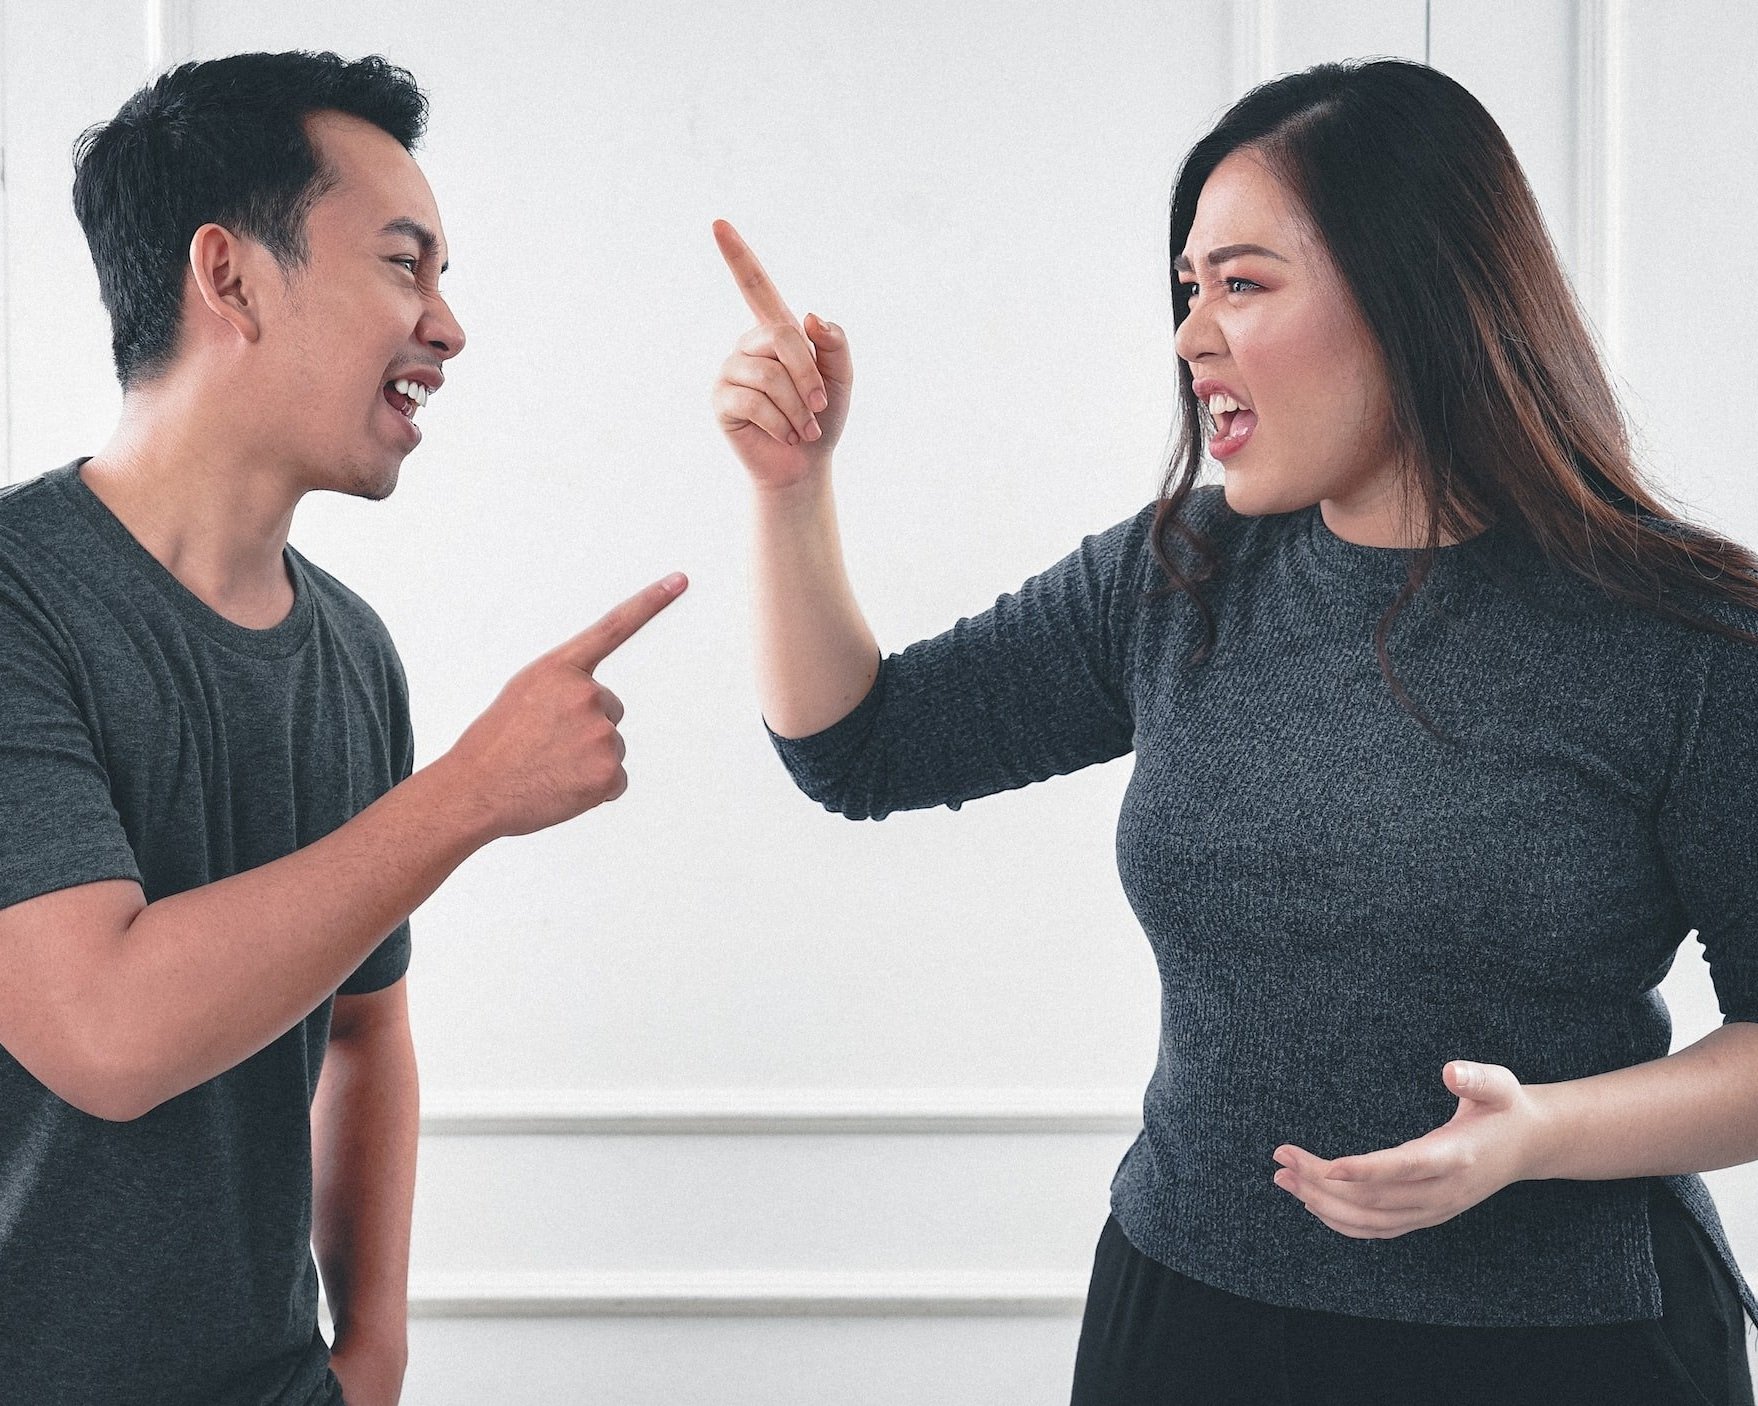 A man and am woman representing a couple, are in a heated argument with scowling expressions and pointing fingers. This image represents criticism as one of the 4 horsemen and warning signs of divorce.